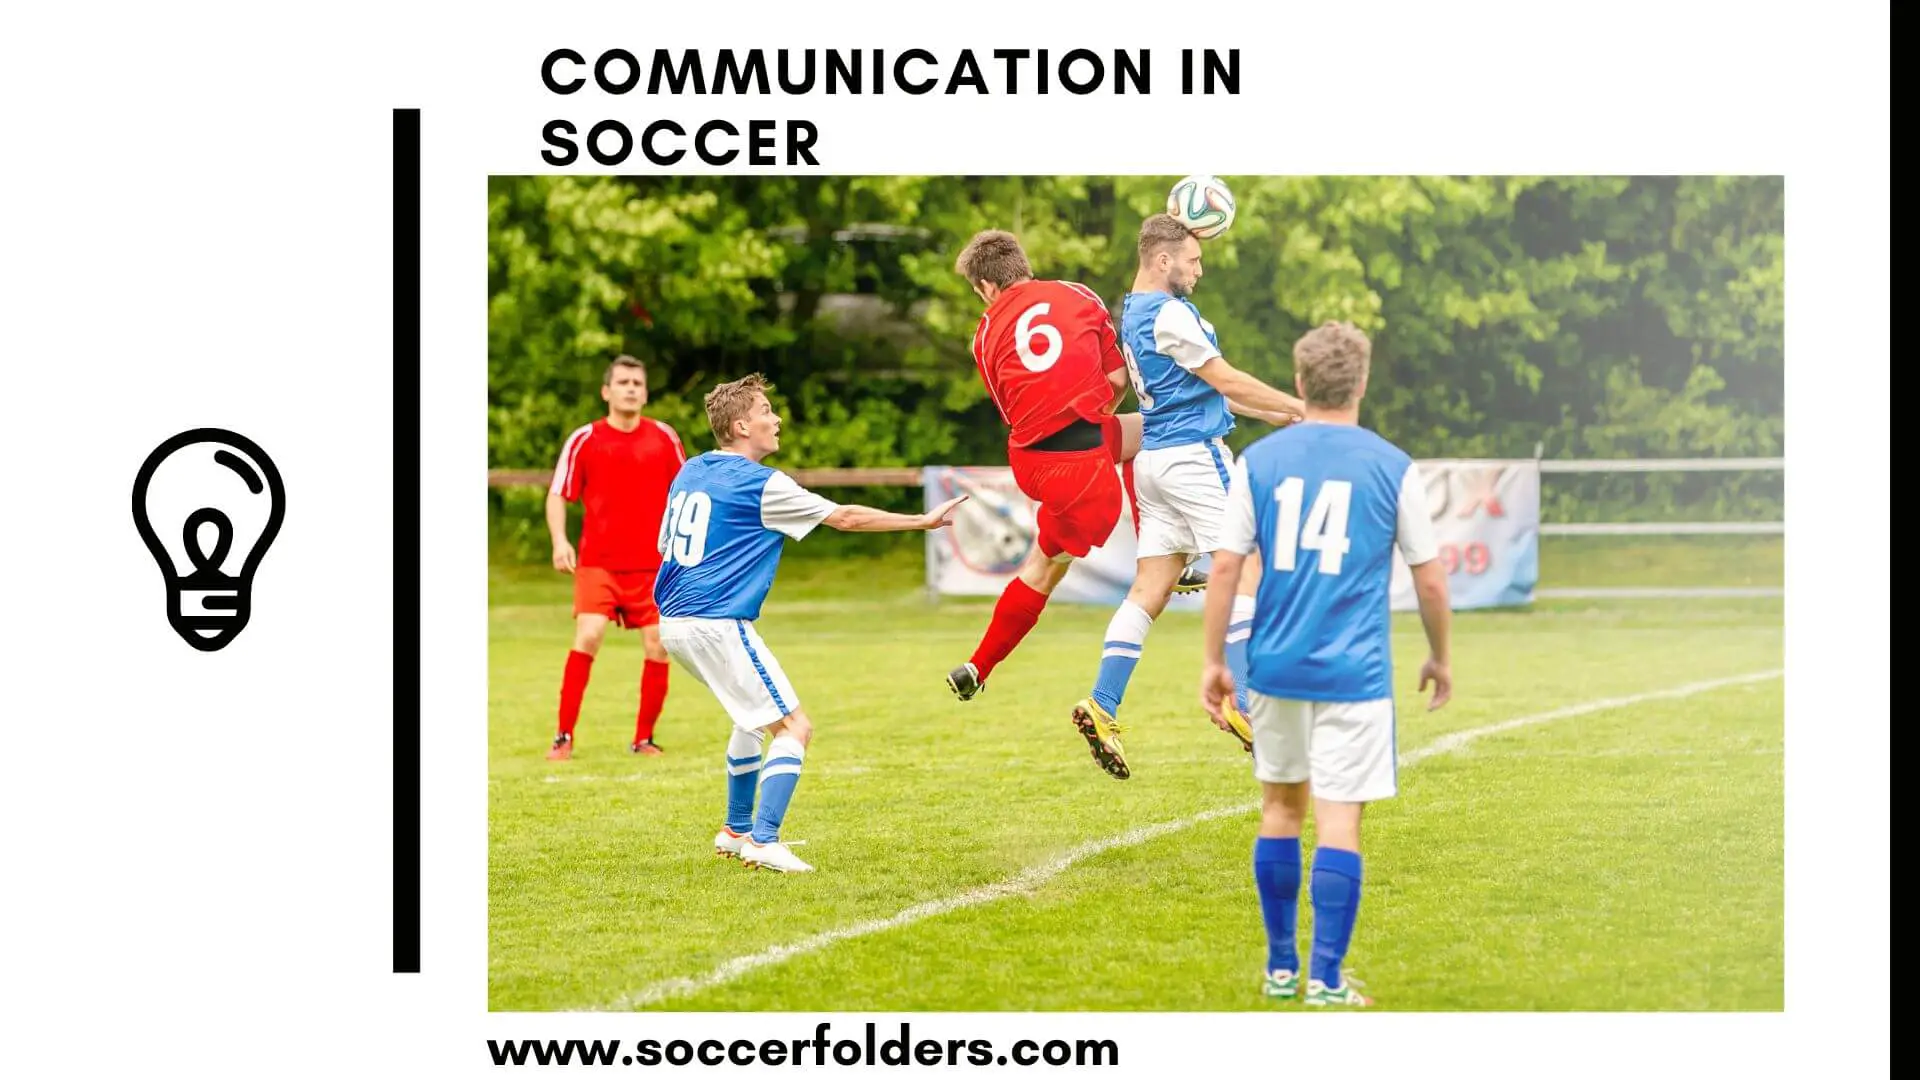 Importance of communication in soccer - Featured image